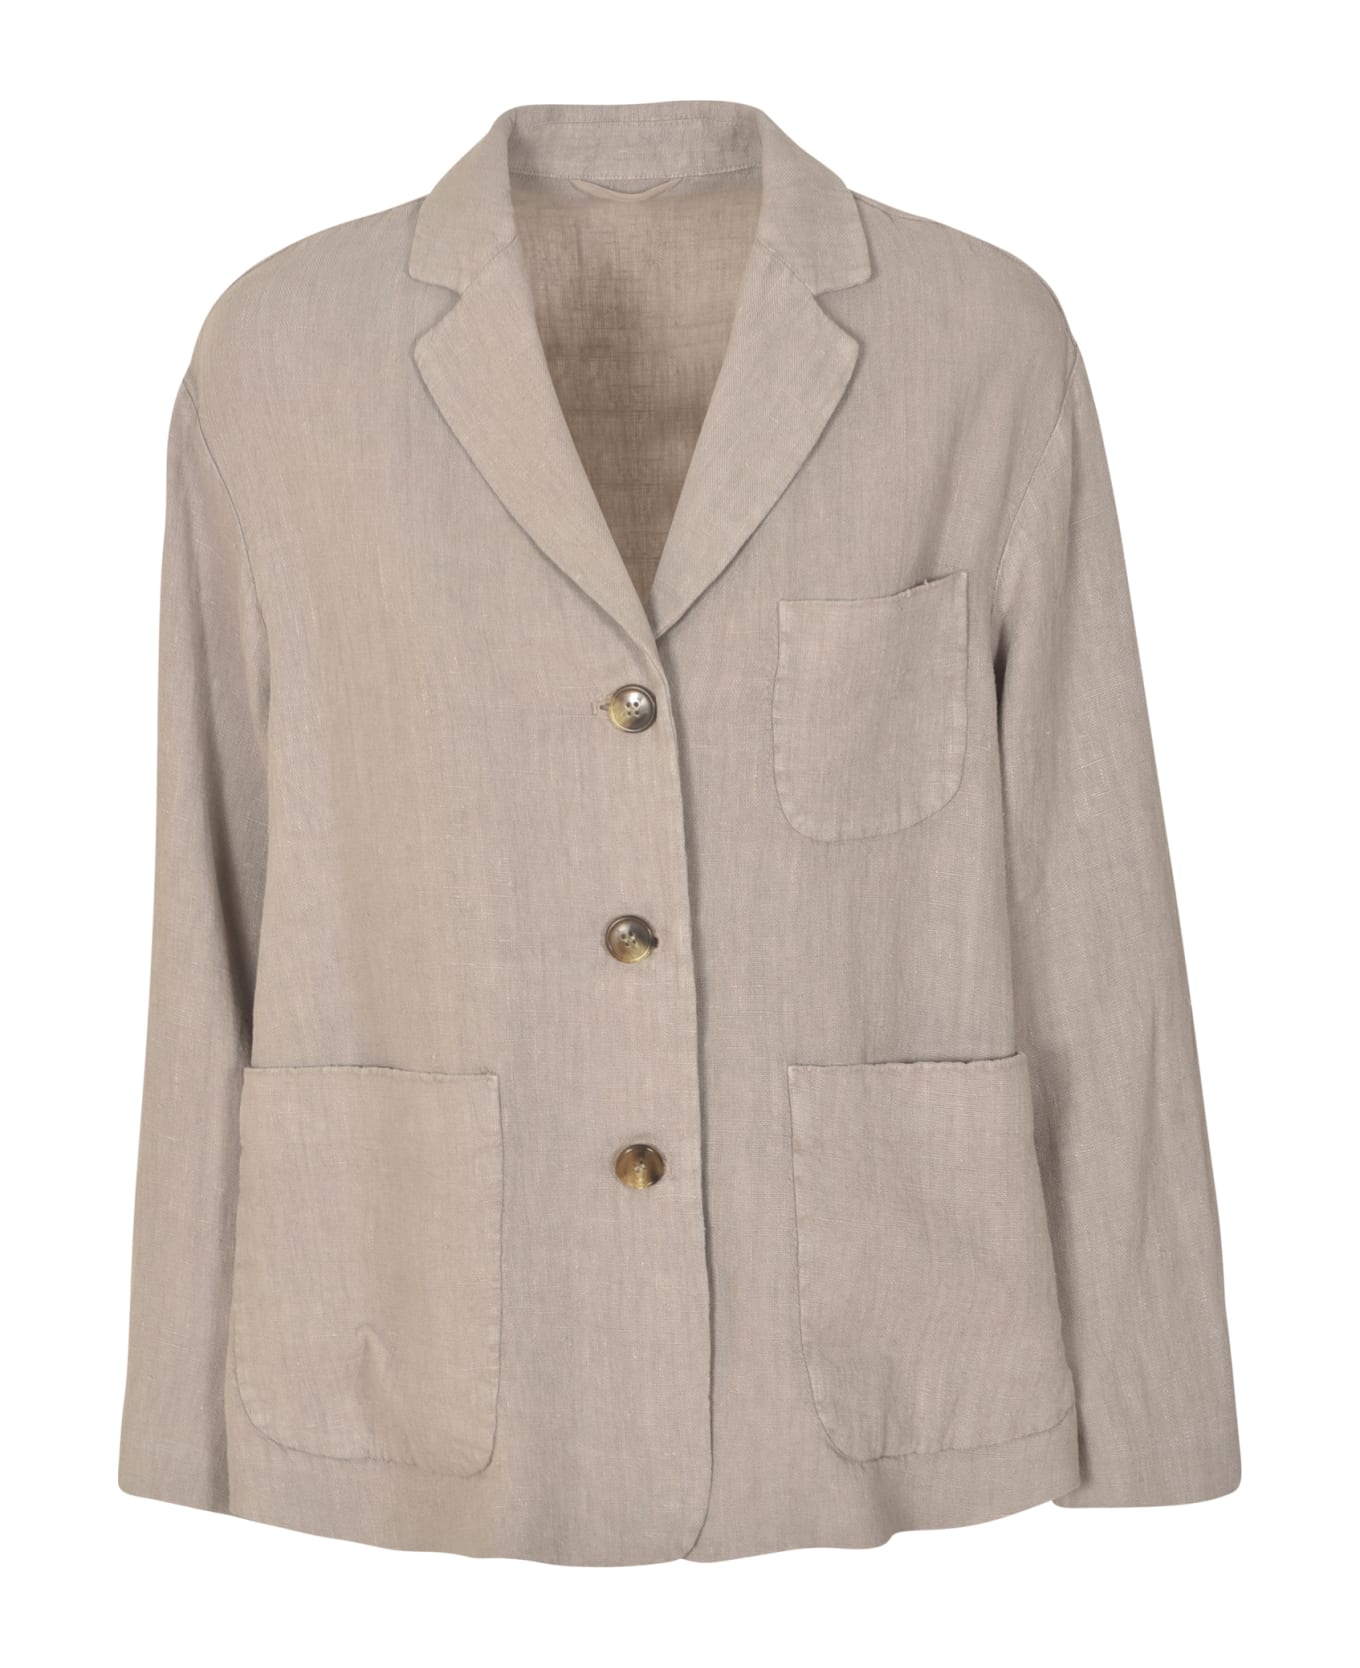 Kiltie Patched Pocket Buttoned Jacket - Sigaro